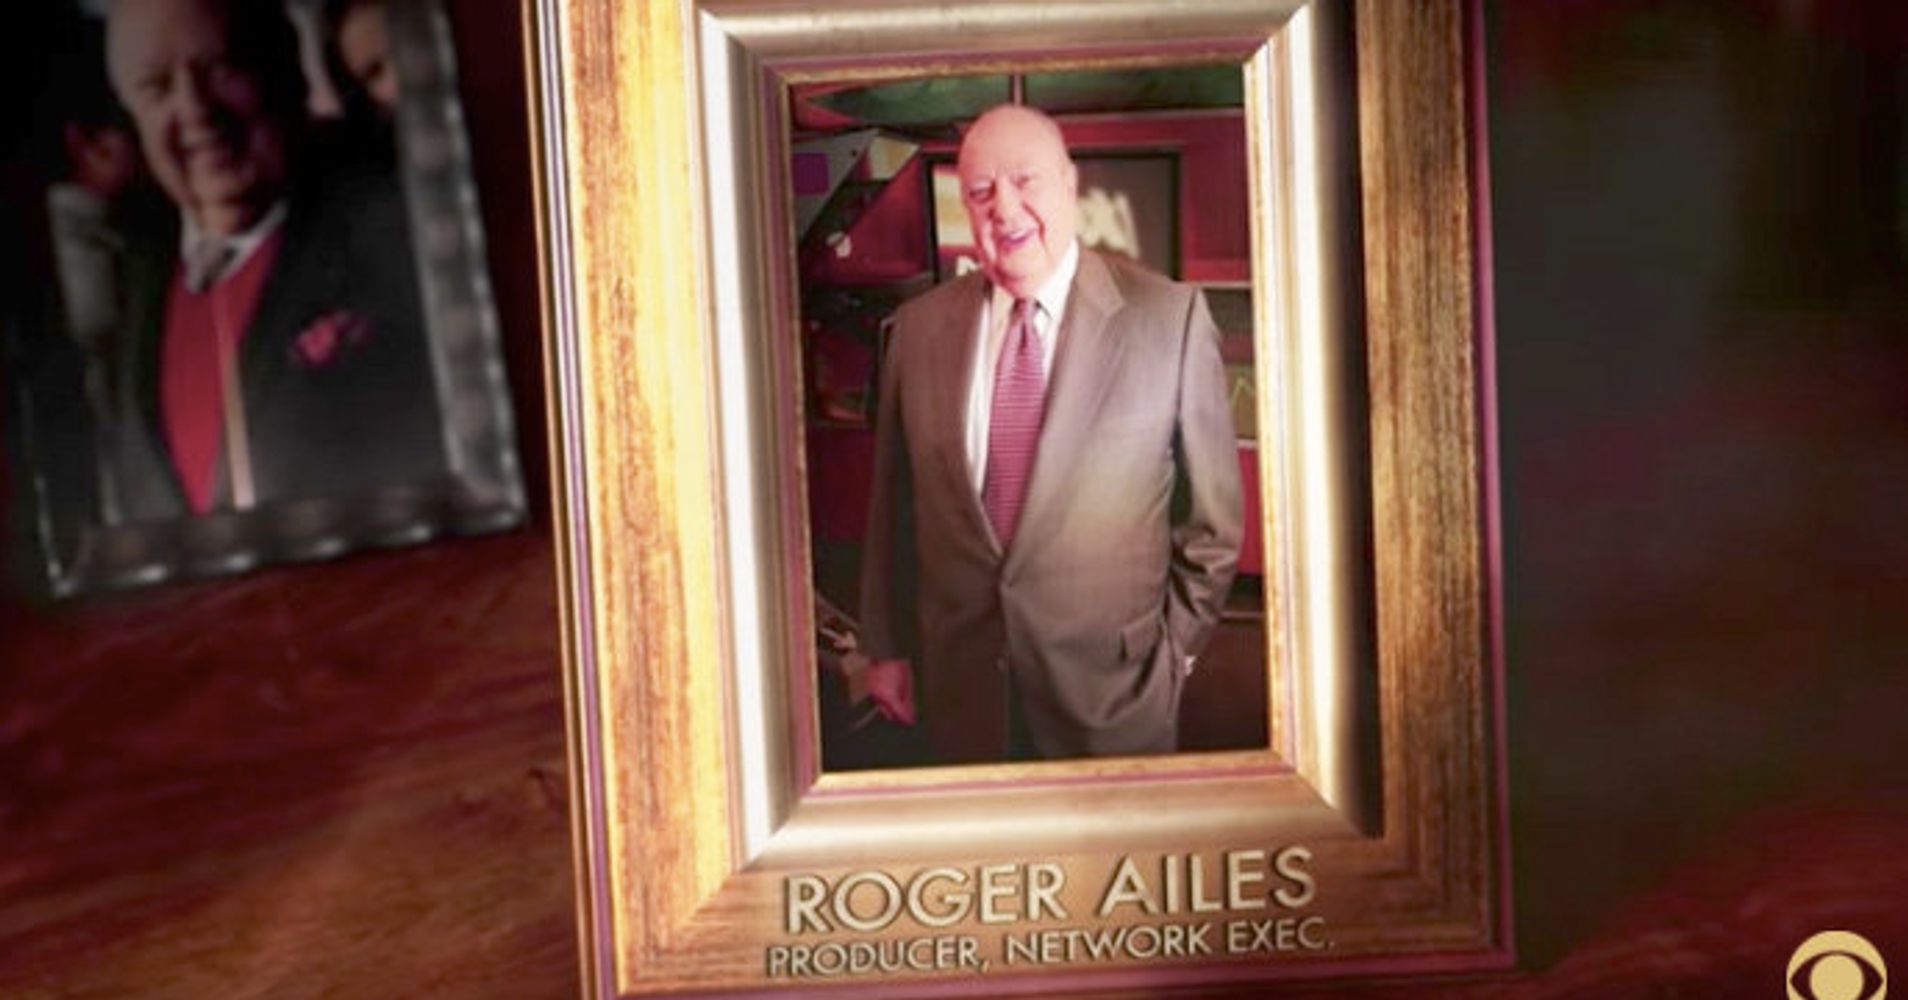 Viewers Outraged To See Accused Sexual Harasser Roger Ailes 